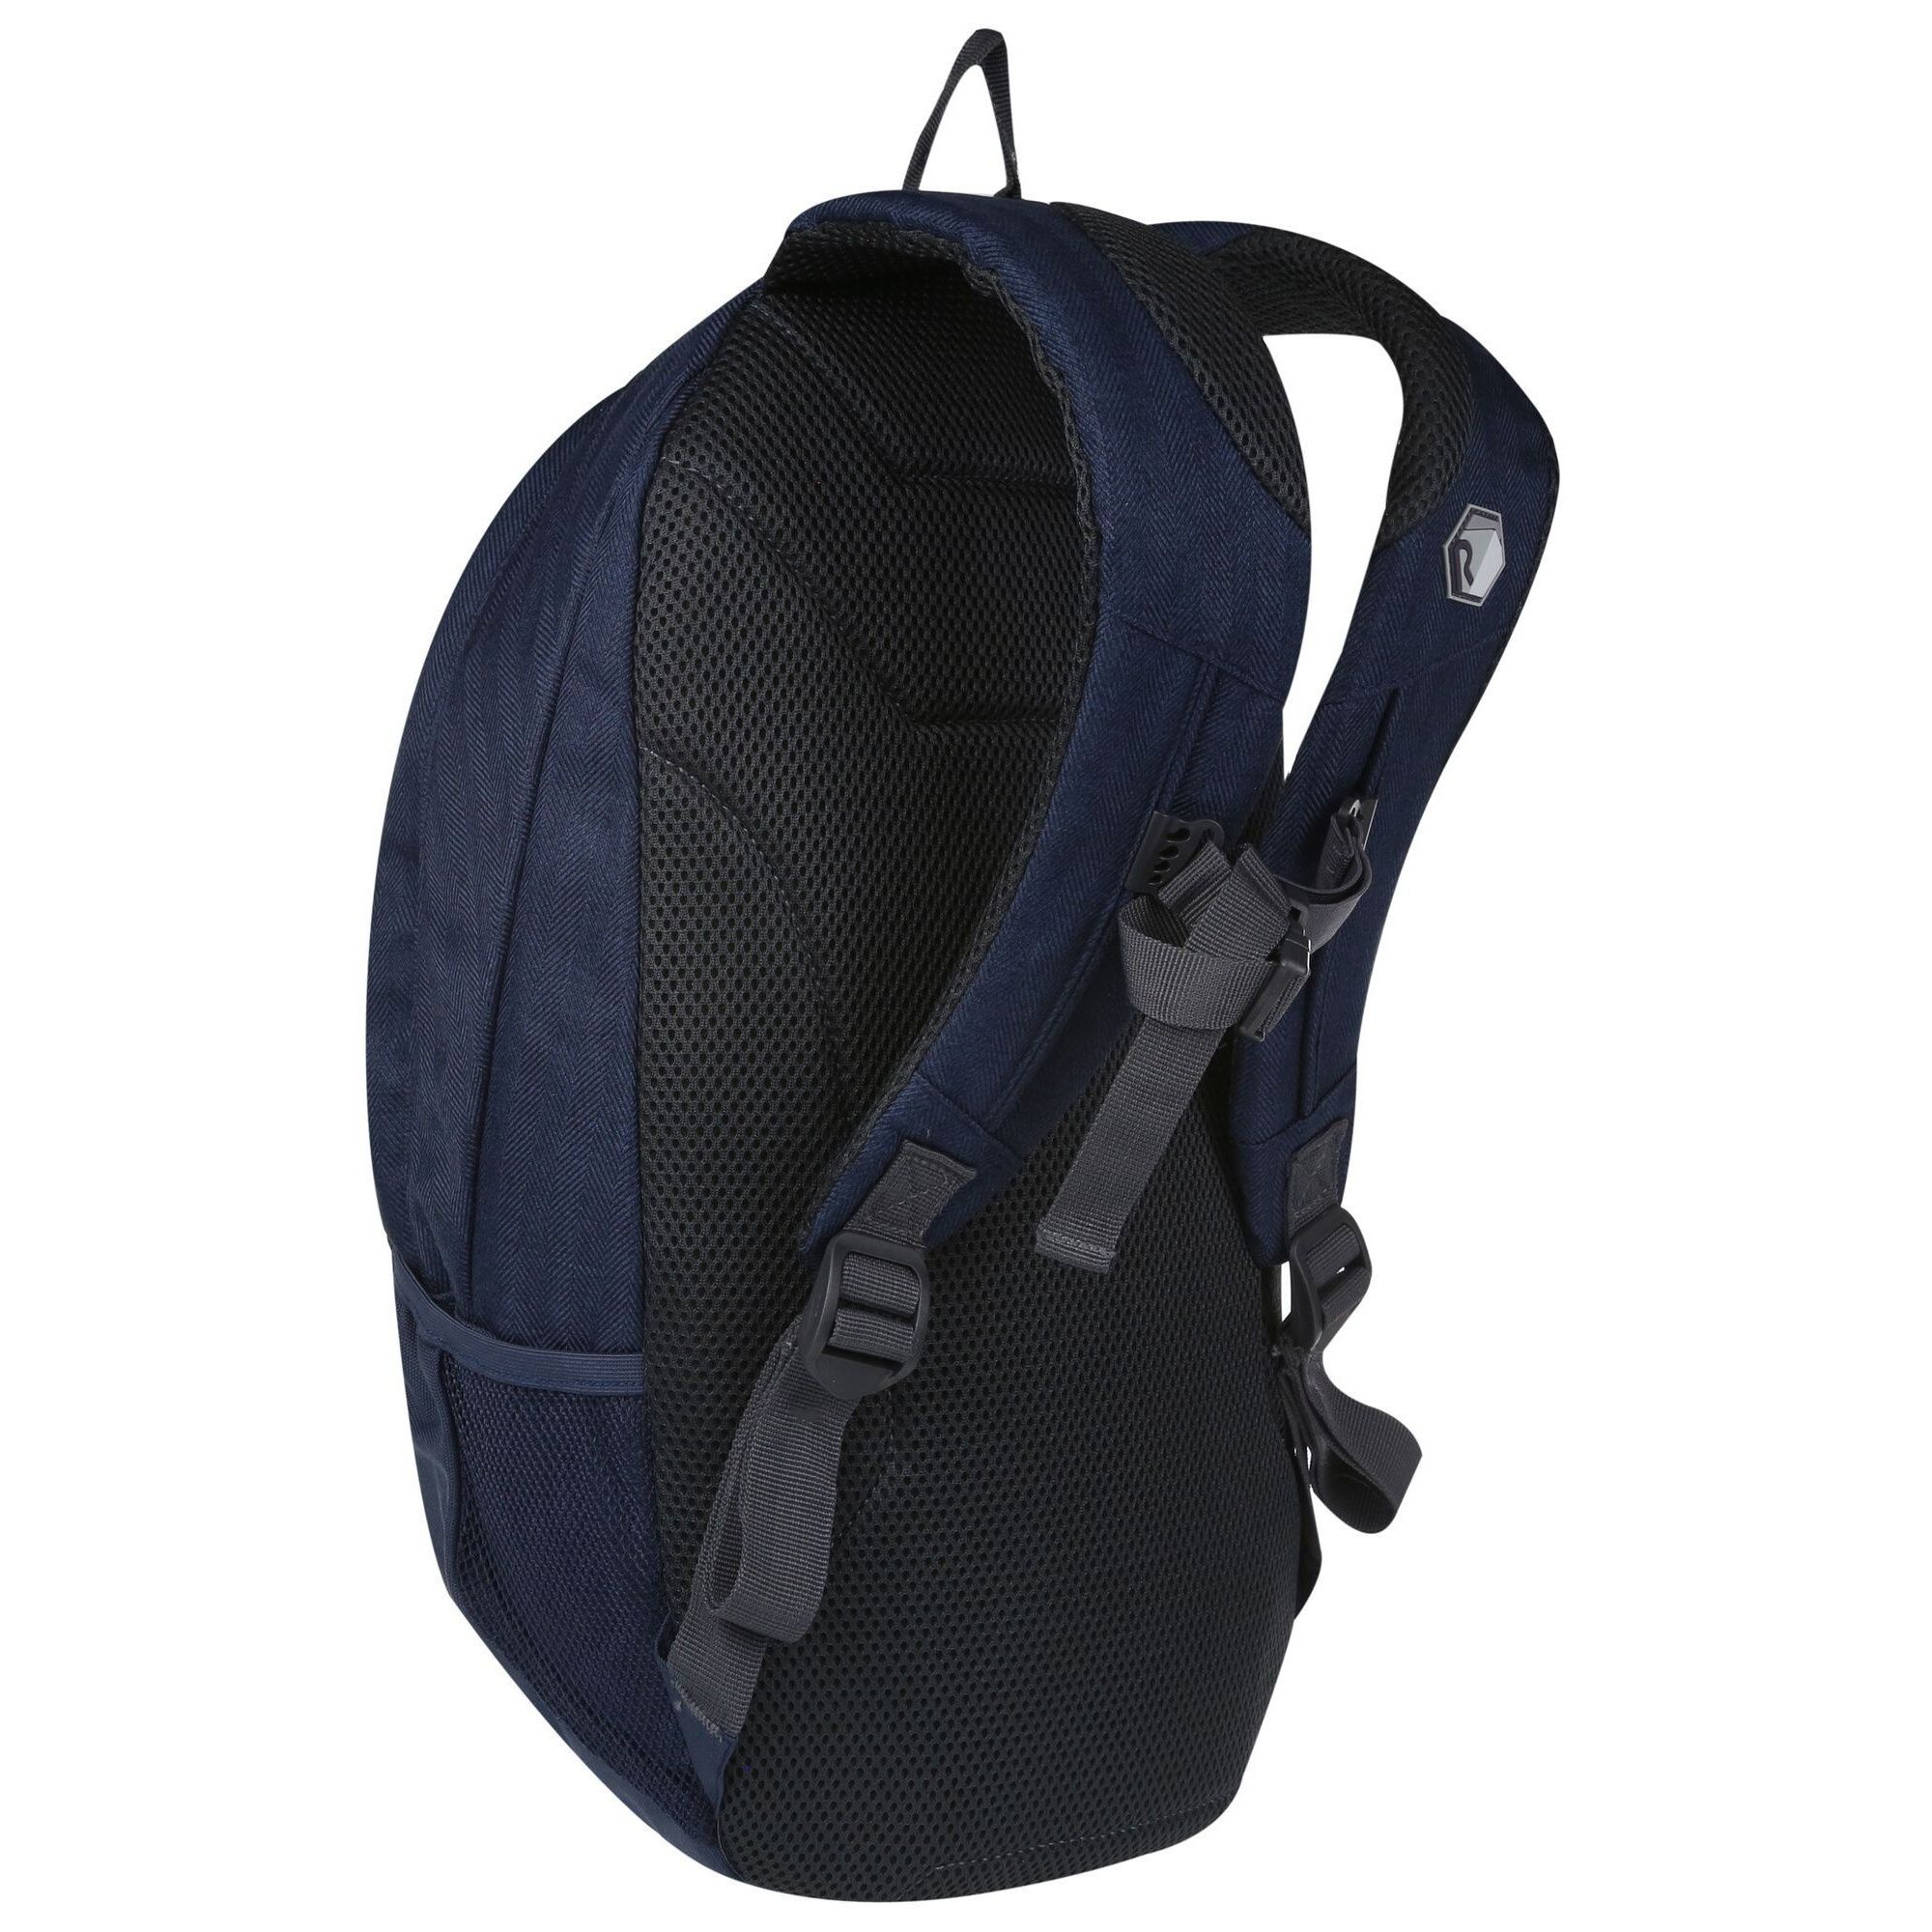 20 litre capacity. Hardwearing 600D polyester. Zipped front pocket. Front webbing attachment loops. 2 internal security pockets. Internal key clip. Easy grab zip pullers.